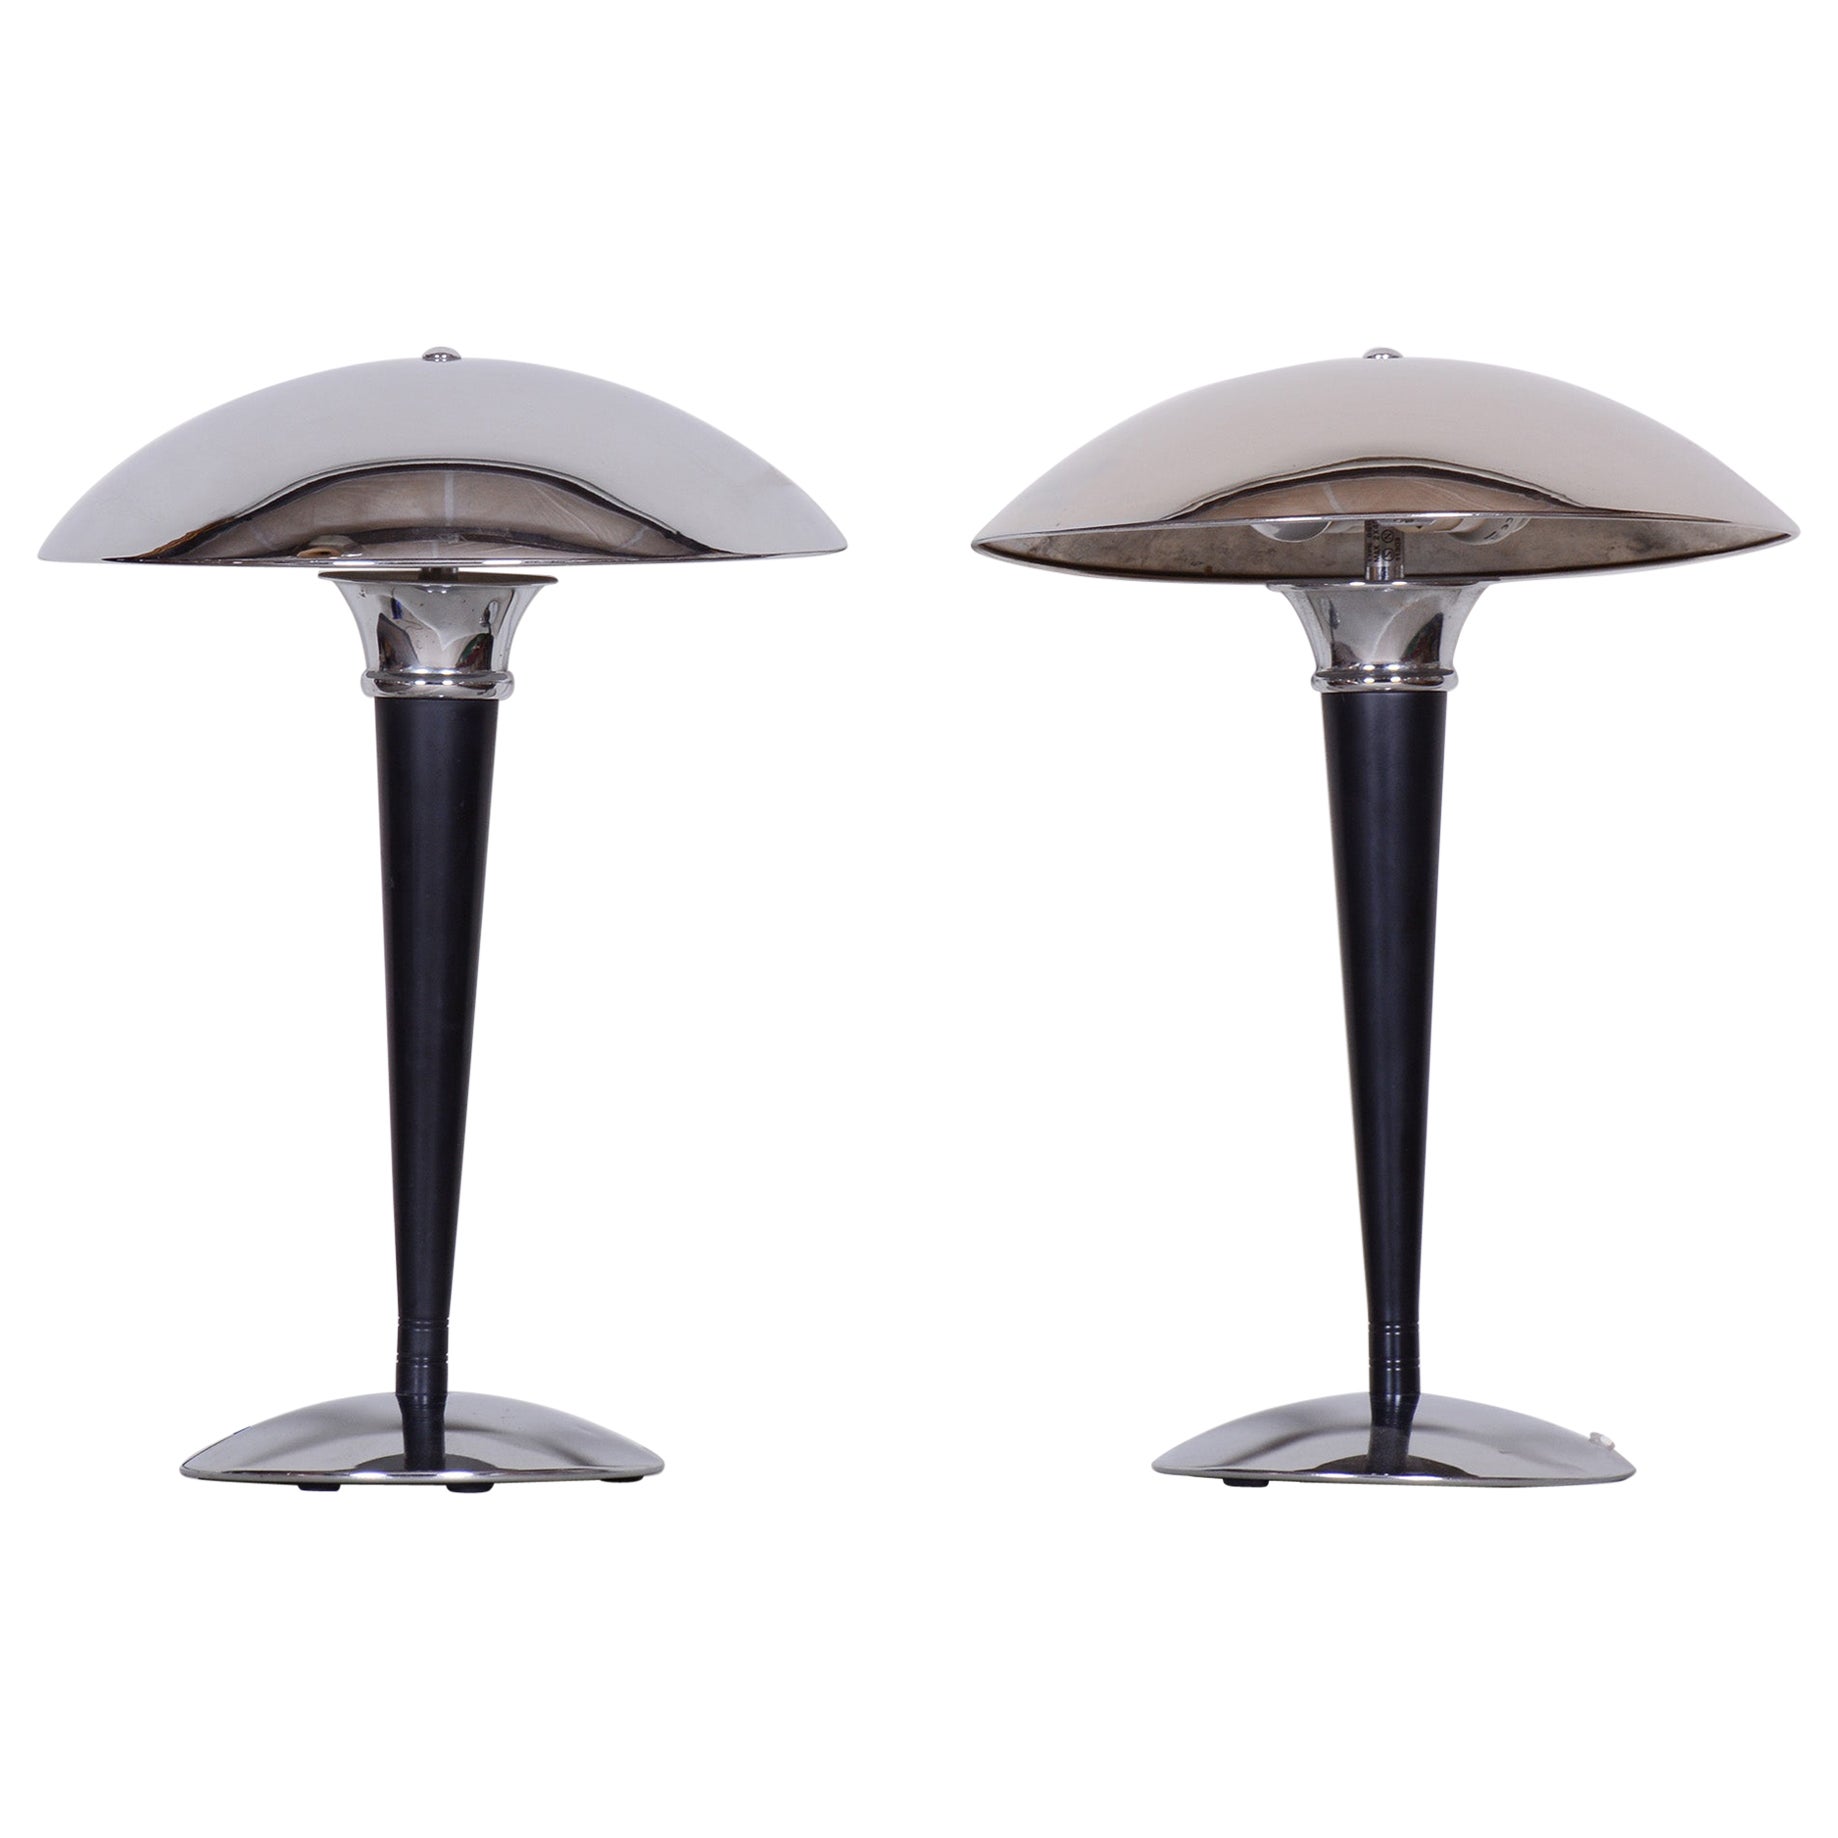 Pair of Midcentury Black Table Lamps, Chrome-Plated Steel, Germany, 1950s